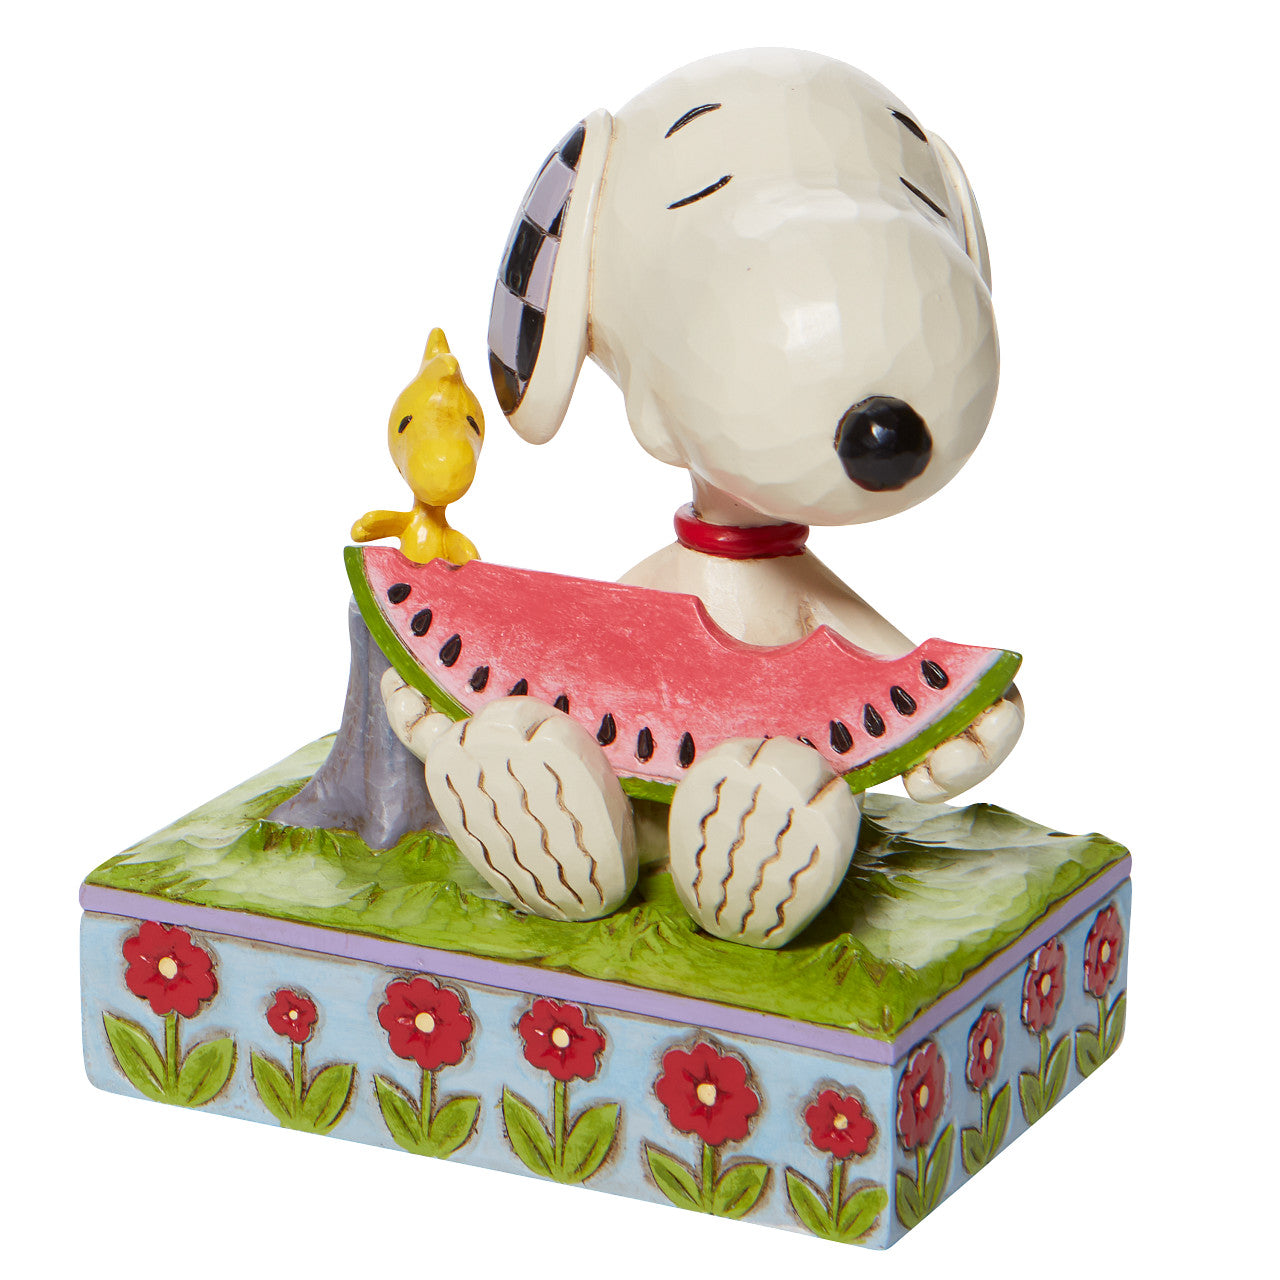 Snoopy and Woodstock eating Watermelon